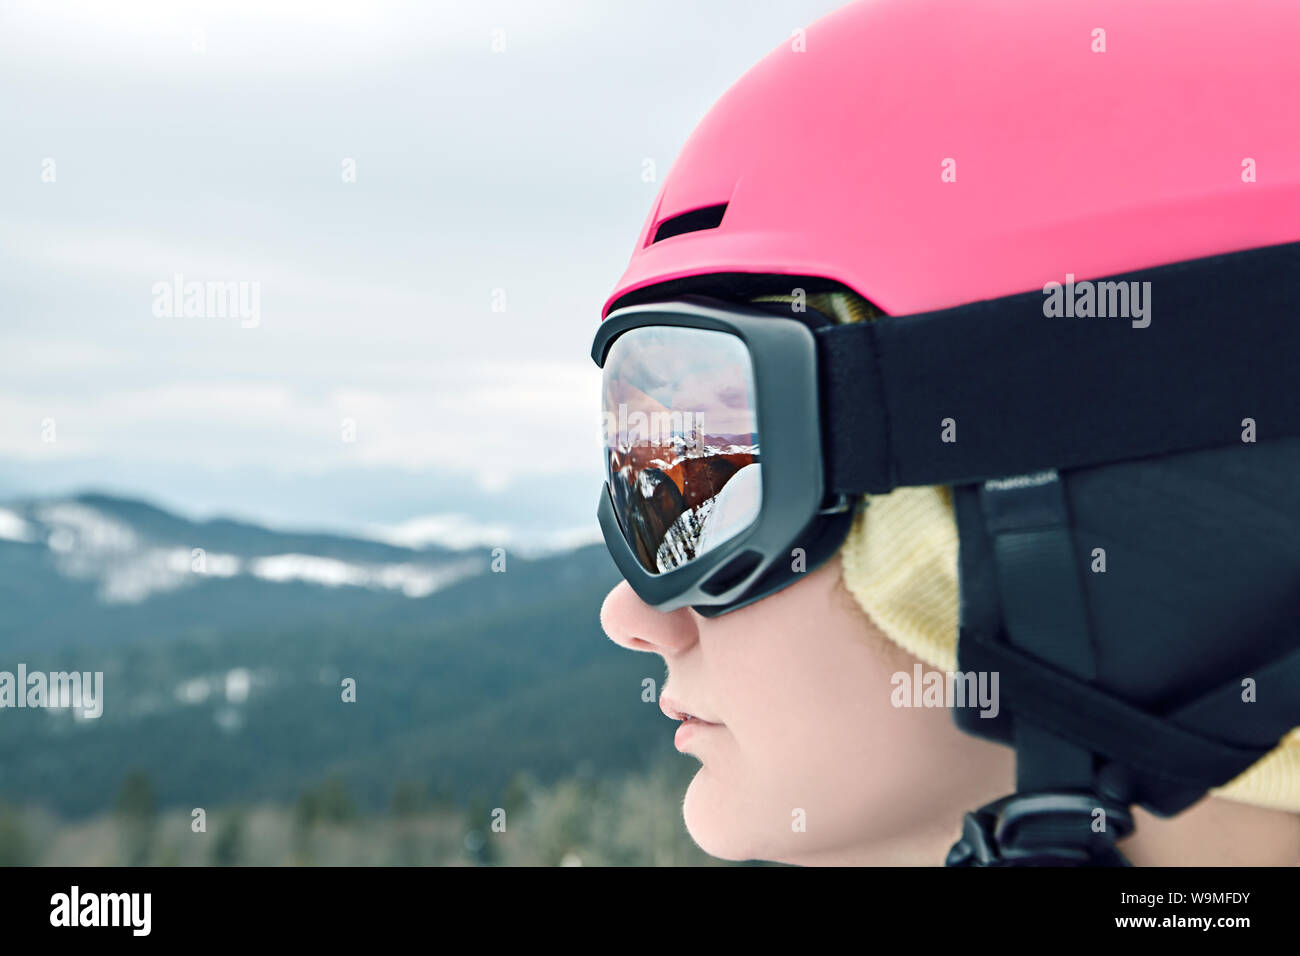 Close up portrait of snowboarder woman at ski resort wearing helmet and goggles with reflection of mountains. Stock Photo